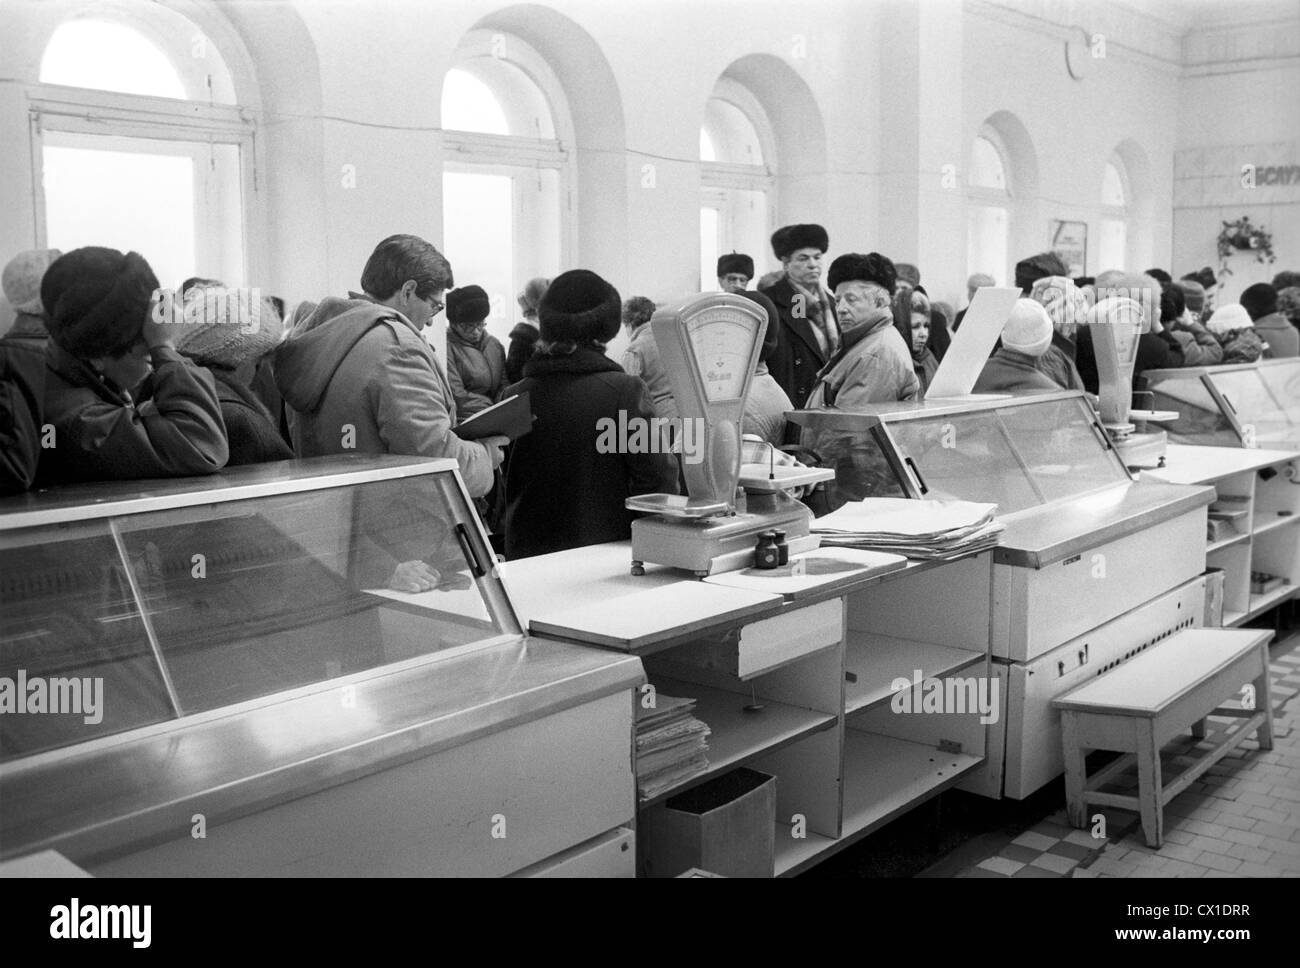 perm-region-ussr-in-1991-perm-residents-facing-problems-with-goods-CX1DRR.jpg